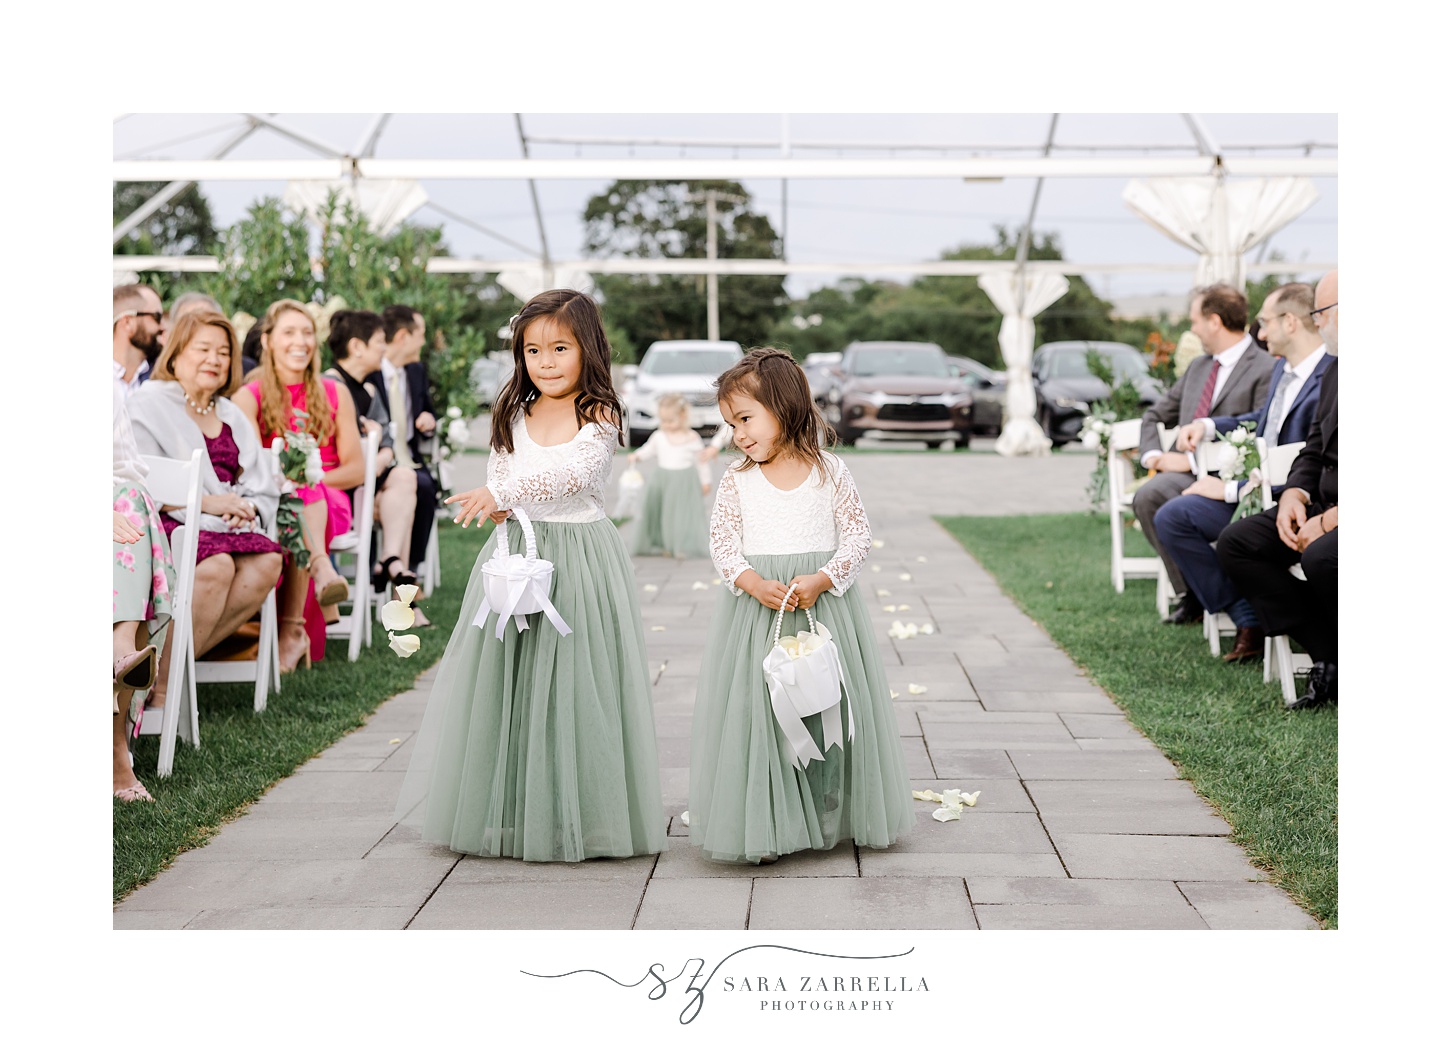 flower girls in white and green dresses walk down aisle for outdoor wedding ceremony at the Atlantic Wyndham Resort